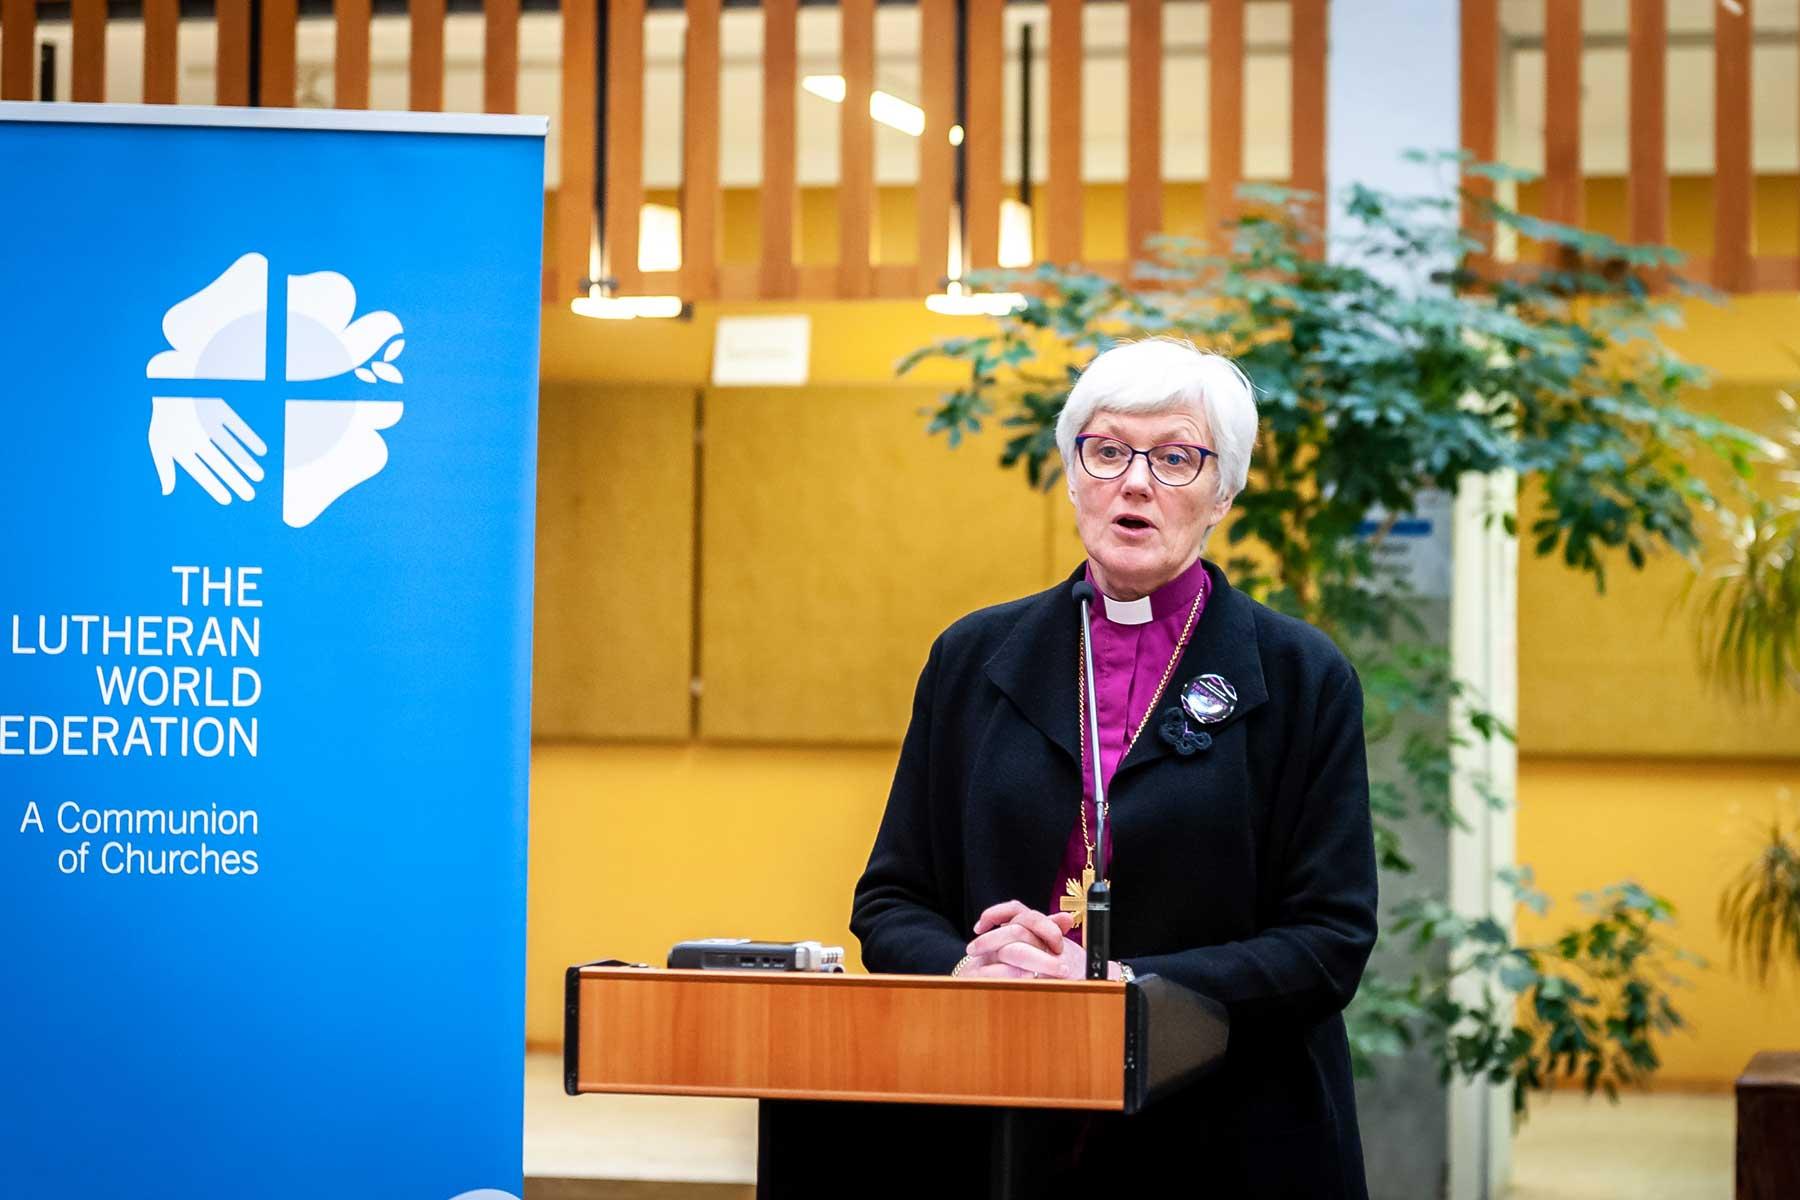 Archbishop Jackelén speaks at Geneva’s Ecumenical Center during the 2019 launch of an LWF publication entitled ‘Resisting Exclusion: Global theological responses to populism’. Photo: LWF/S. Gallay